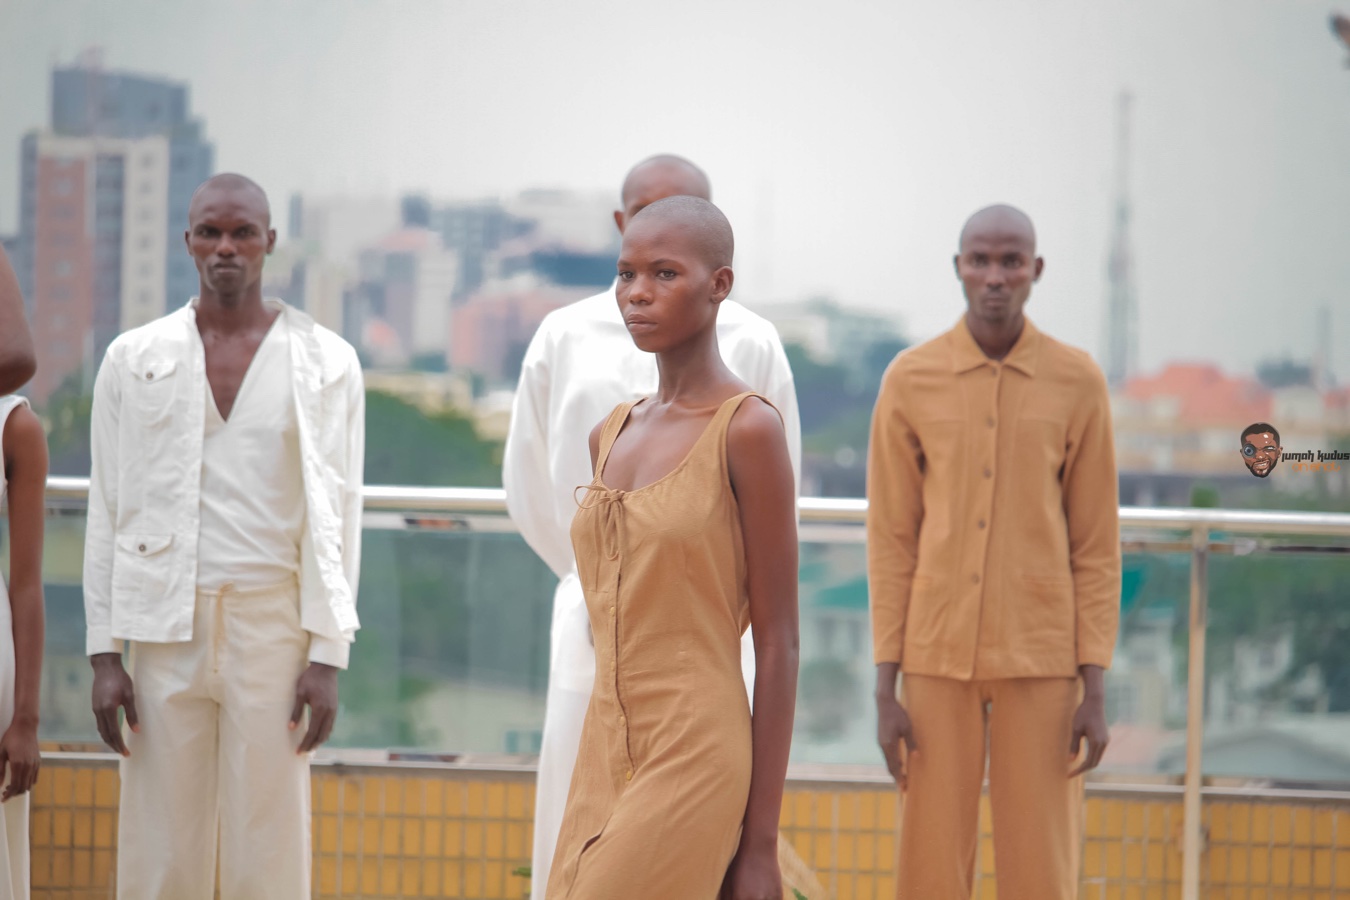 Maxivive Tells A Compelling Story About Resilience & Bravery With “Okiti” For Dry 2019